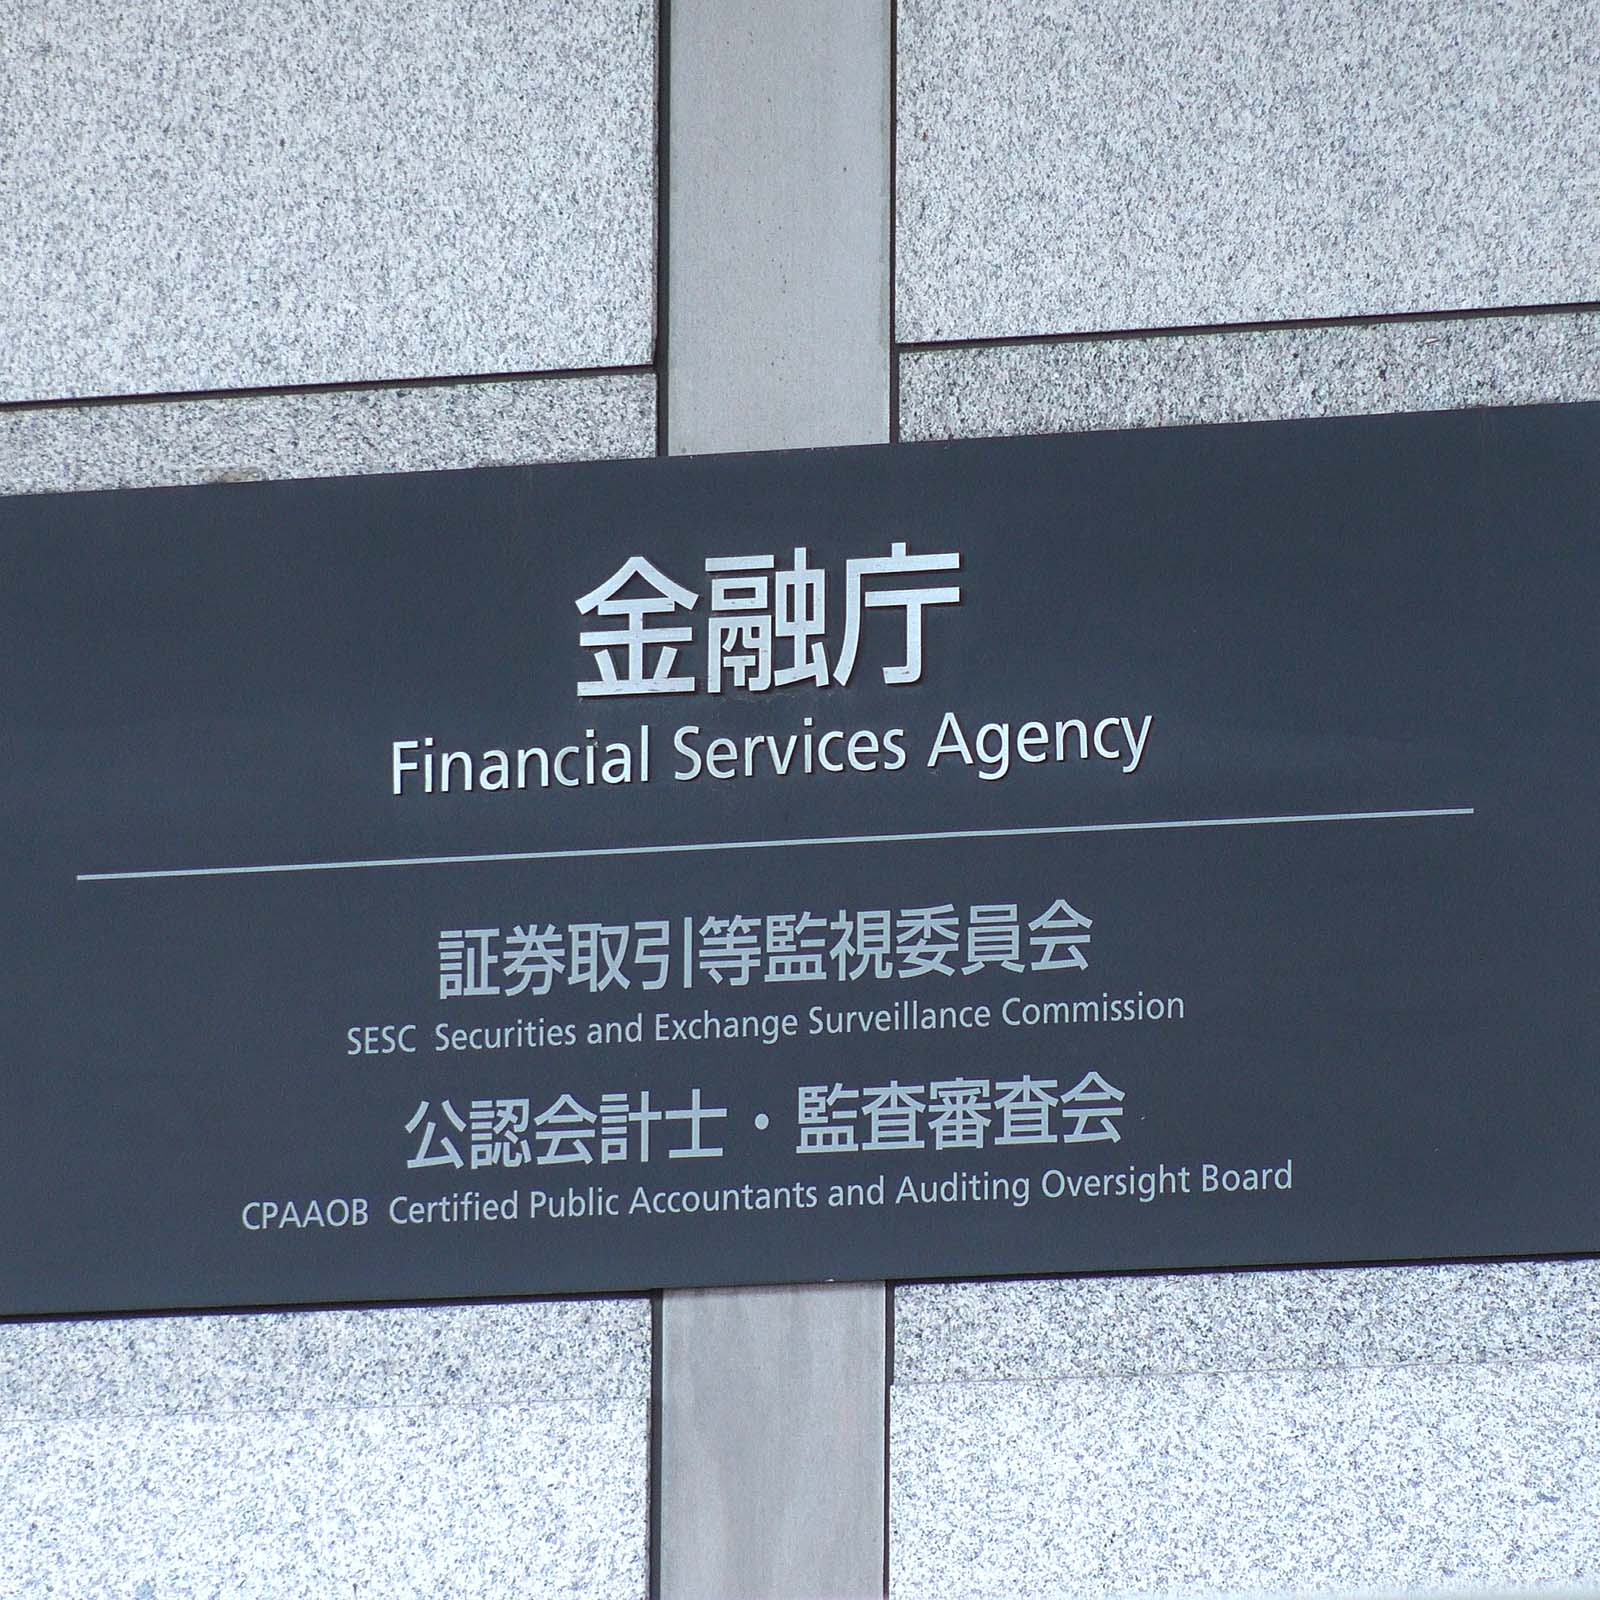 With No One Price Law for Bitcoin, Japan’s FSA Debates Restrictions on Leverage